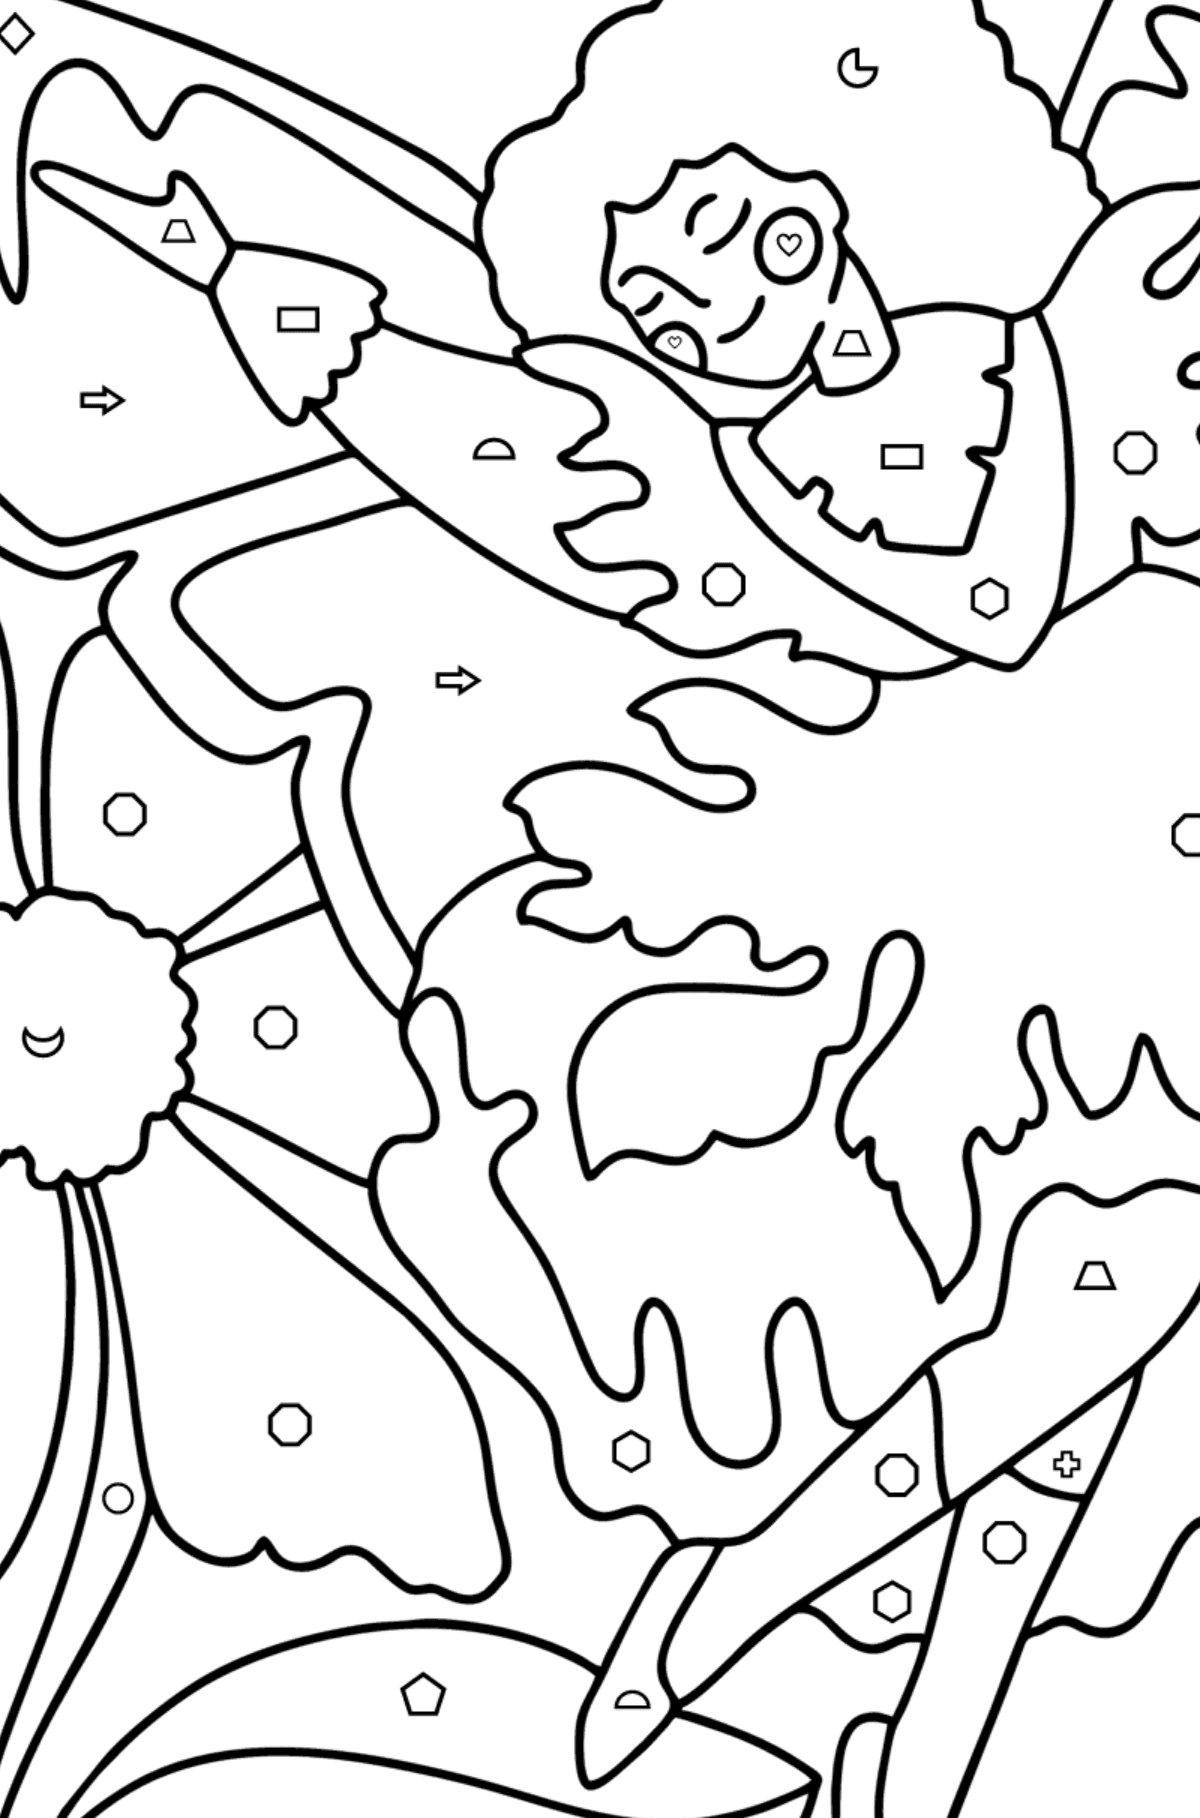 Fairy flies coloring page - Coloring by Geometric Shapes for Kids